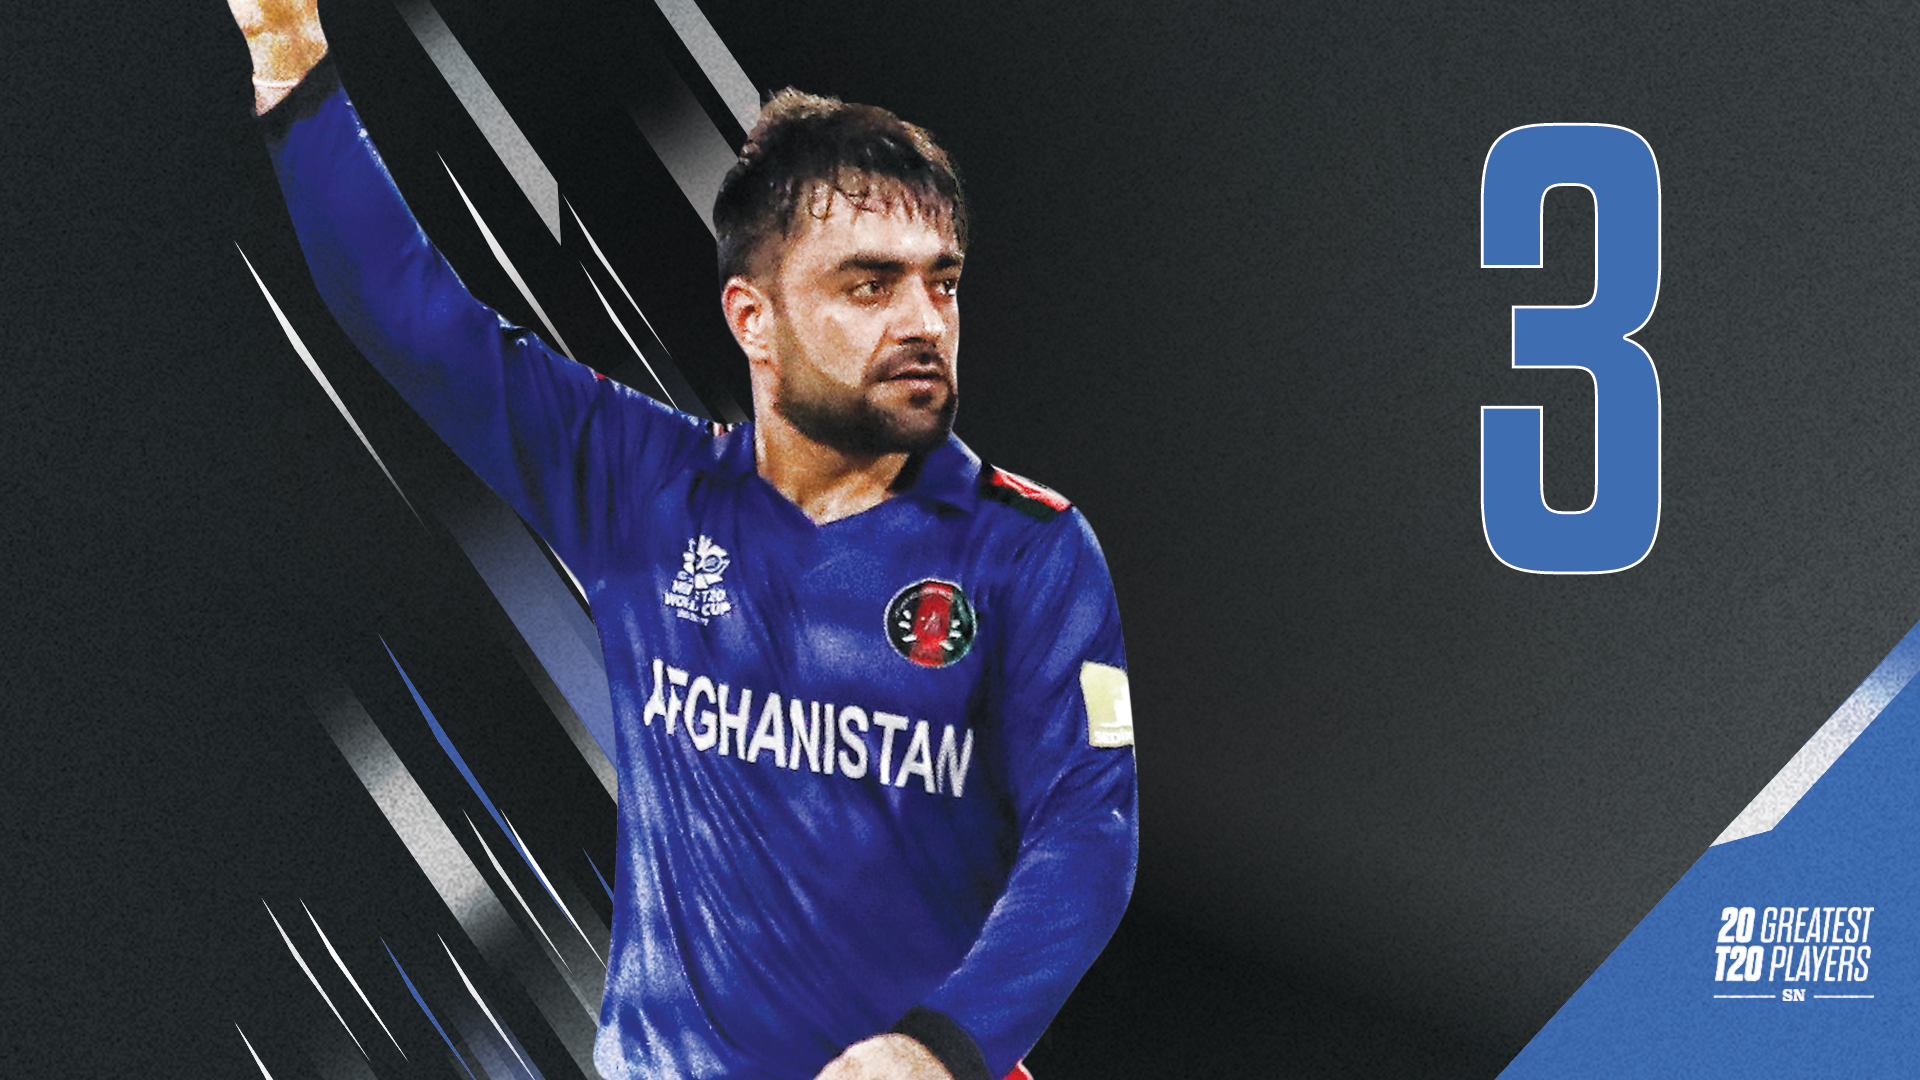 20 Greatest T20 Players: Rashid Khan ranks at No.3 | Counting down the best Twenty20 cricketers ever | Sporting News